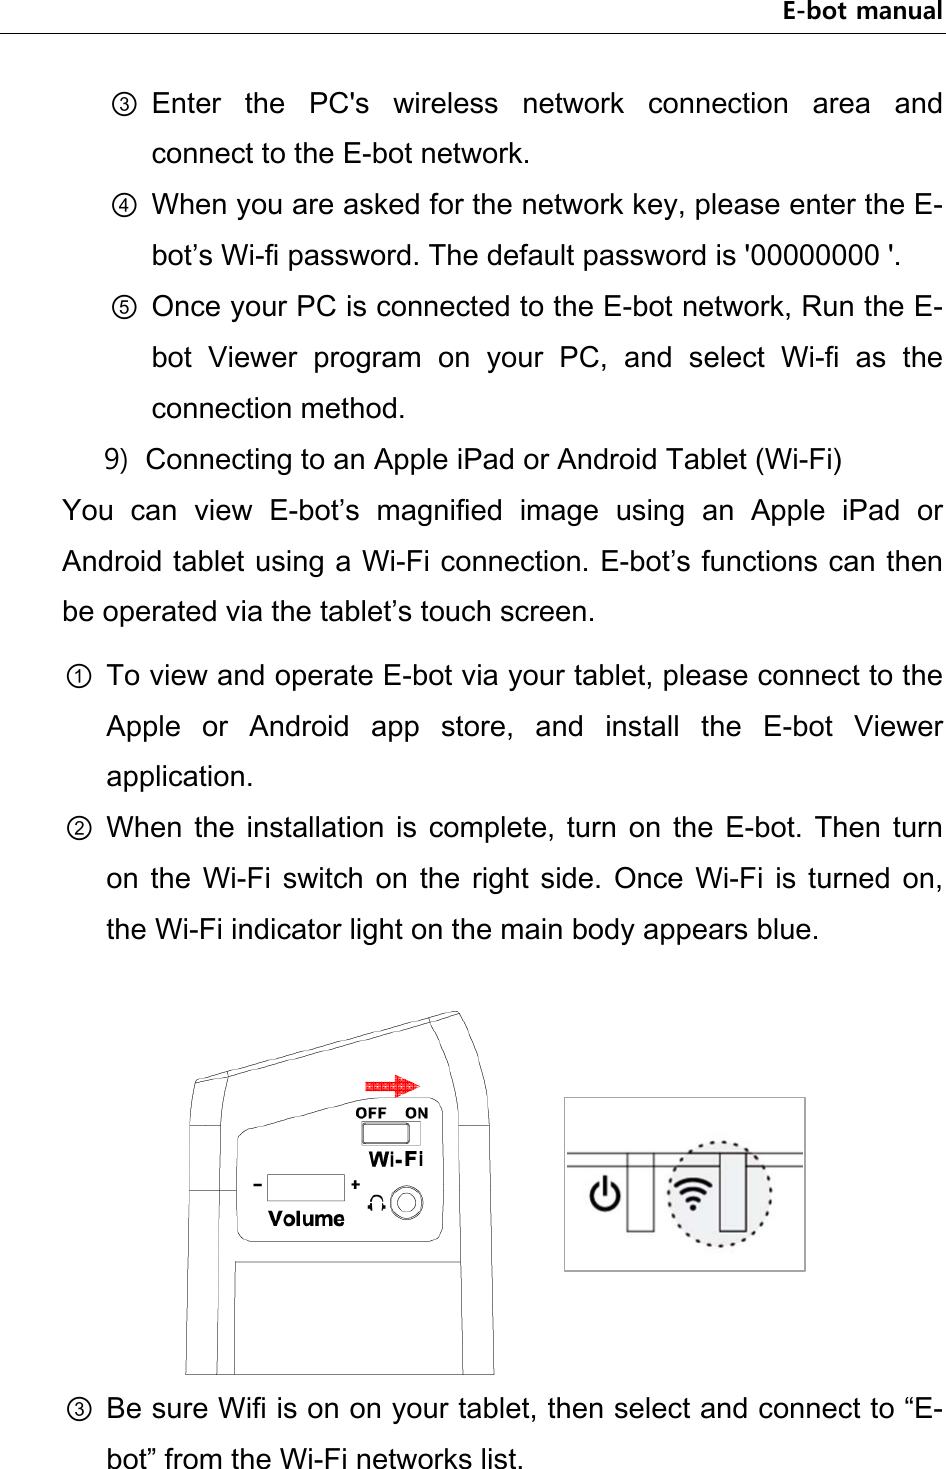 E-bot manual ③ Enter  the  PC&apos;s  wireless  network  connection  area  and connect to the E-bot network. ④ When you are asked for the network key, please enter the E-bot’s Wi-fi password. The default password is &apos;00000000 &apos;. ⑤ Once your PC is connected to the E-bot network, Run the E-bot  Viewer  program  on  your  PC,  and  select  Wi-fi  as  the connection method. 9) Connecting to an Apple iPad or Android Tablet (Wi-Fi) You  can  view  E-bot’s  magnified  image  using  an  Apple  iPad  or Android tablet using a Wi-Fi connection. E-bot’s functions can then be operated via the tablet’s touch screen.   ① To view and operate E-bot via your tablet, please connect to the Apple  or  Android  app  store,  and  install  the  E-bot  Viewer application. ② When  the  installation  is  complete,  turn  on  the  E-bot.  Then  turn on  the  Wi-Fi  switch  on  the right  side.  Once  Wi-Fi  is  turned  on, the Wi-Fi indicator light on the main body appears blue.     ③ Be sure Wifi is on on your tablet, then select and connect to “E-bot” from the Wi-Fi networks list.   